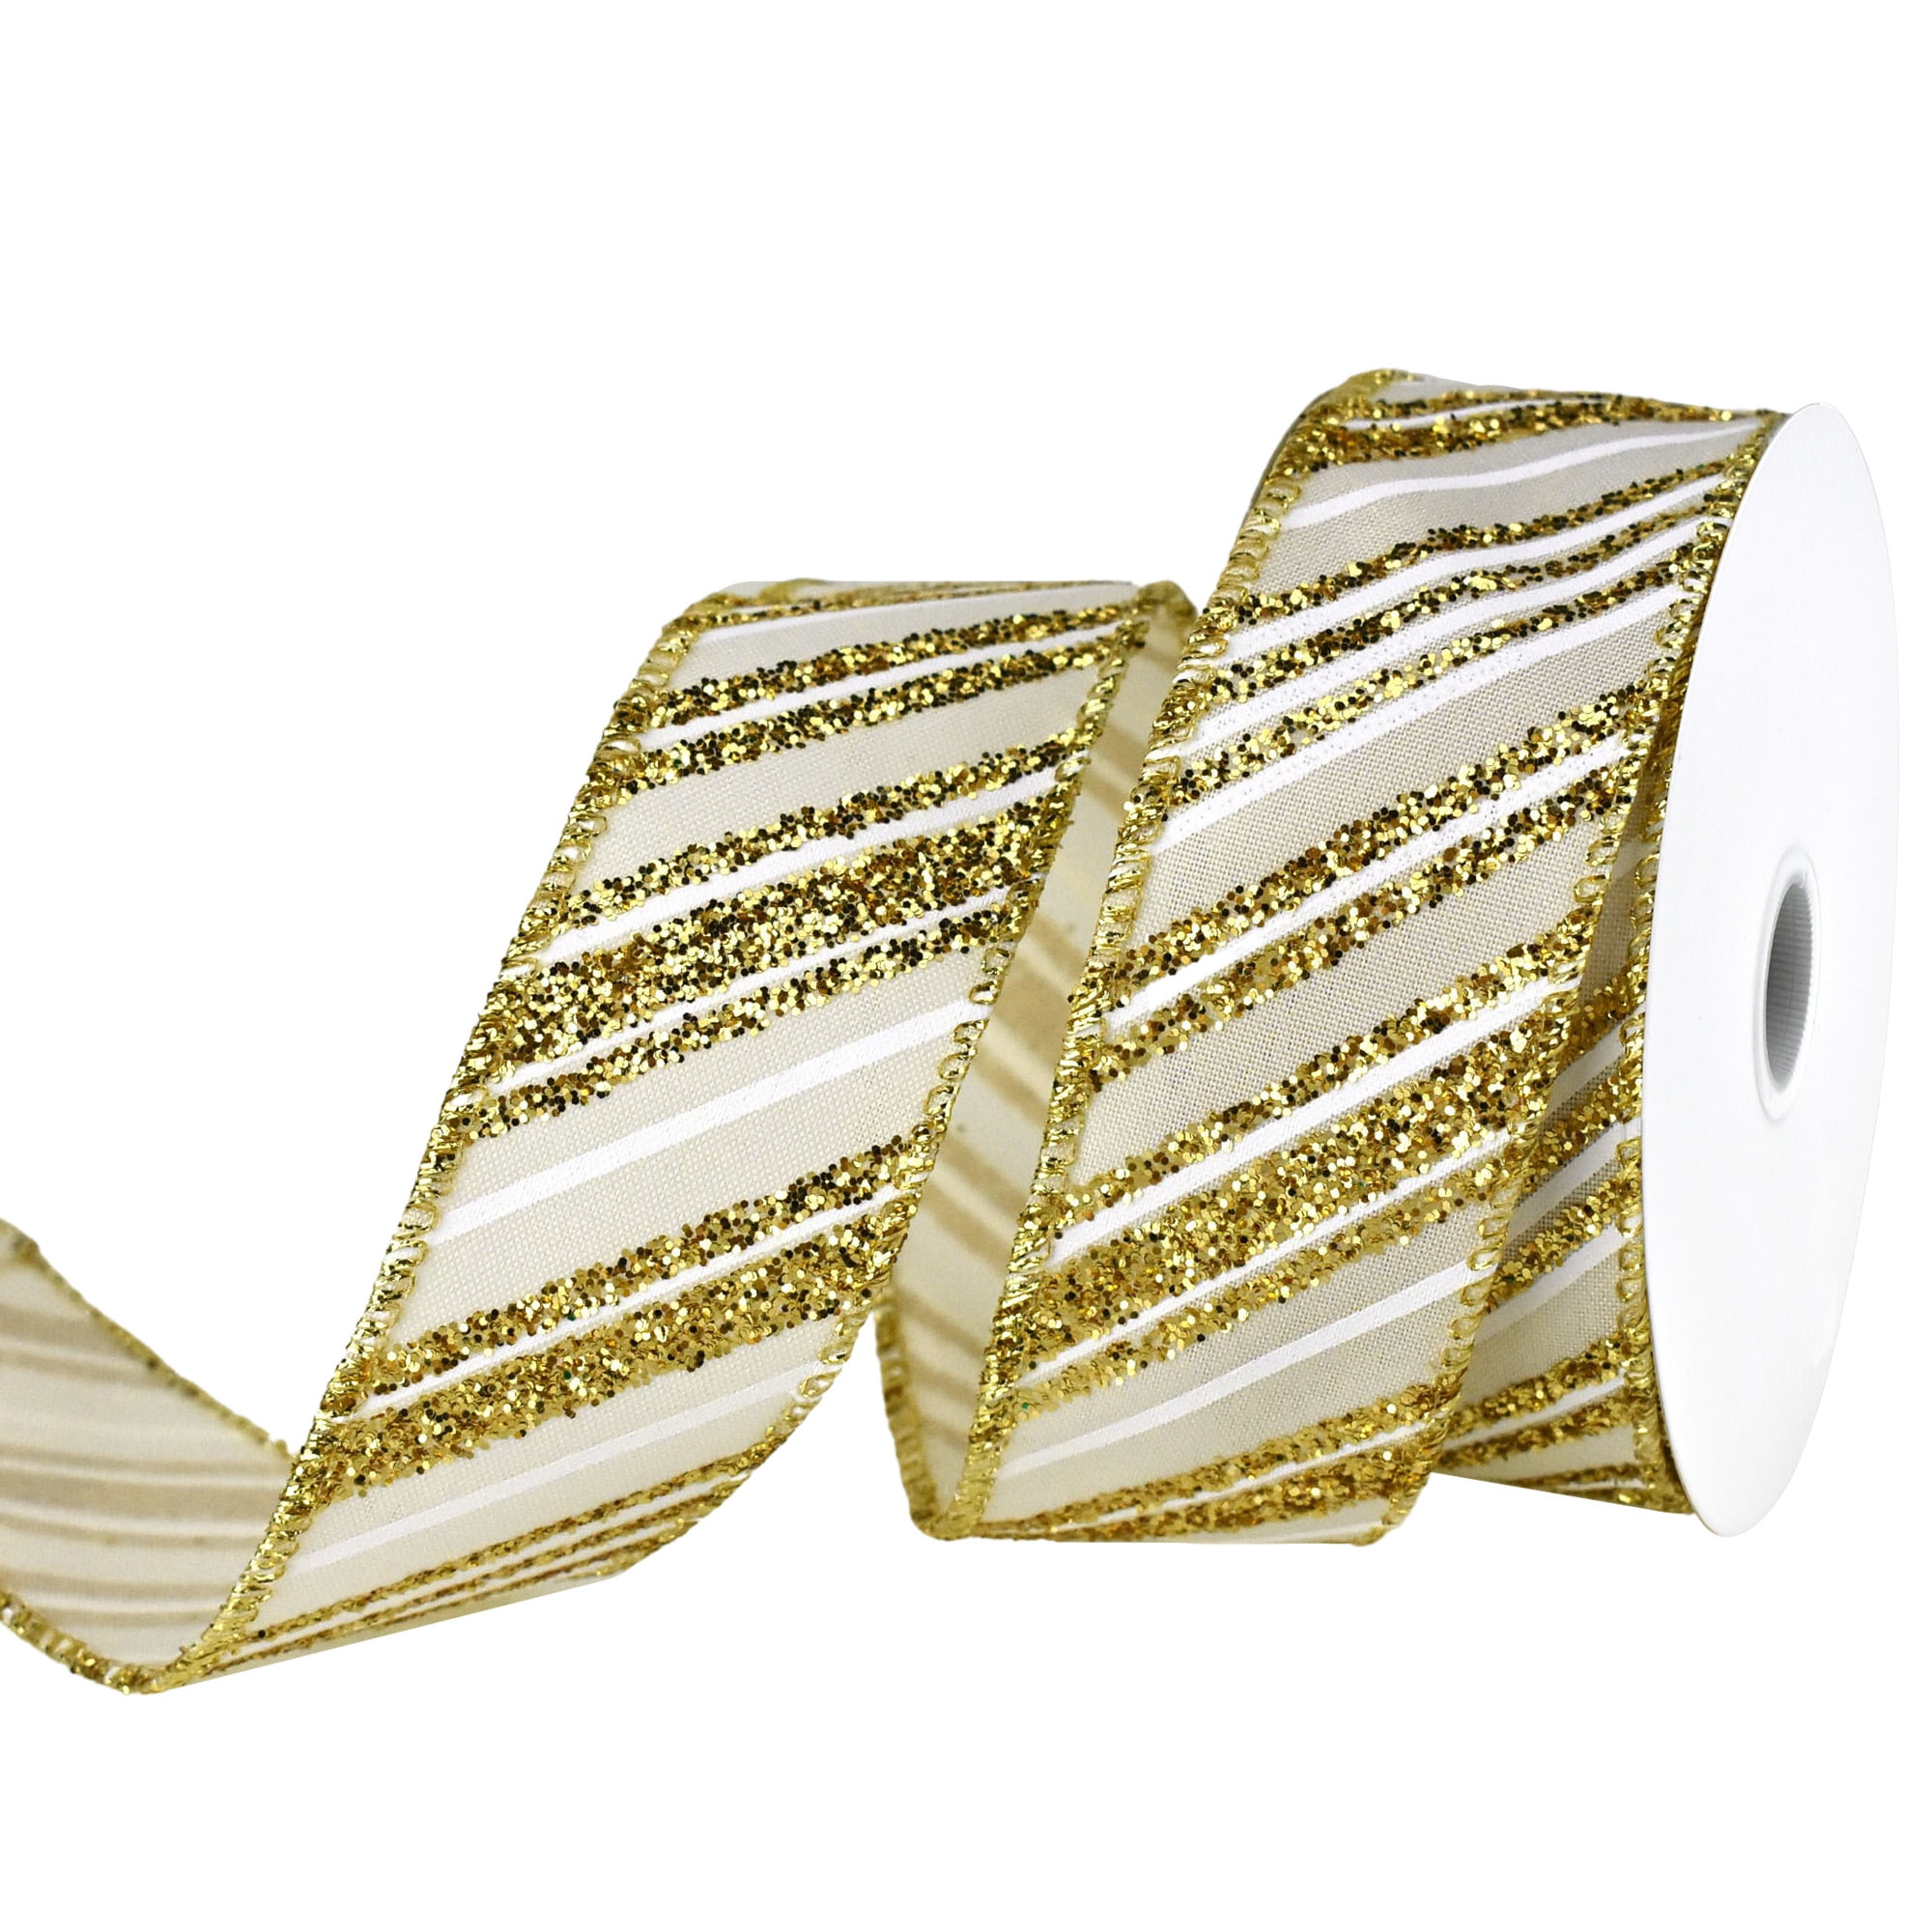 Wired Metallic Gold ribbon with Black and Gold Glitter Diamonds Num.40 – 2  1/2″ – Mum Supplies.com